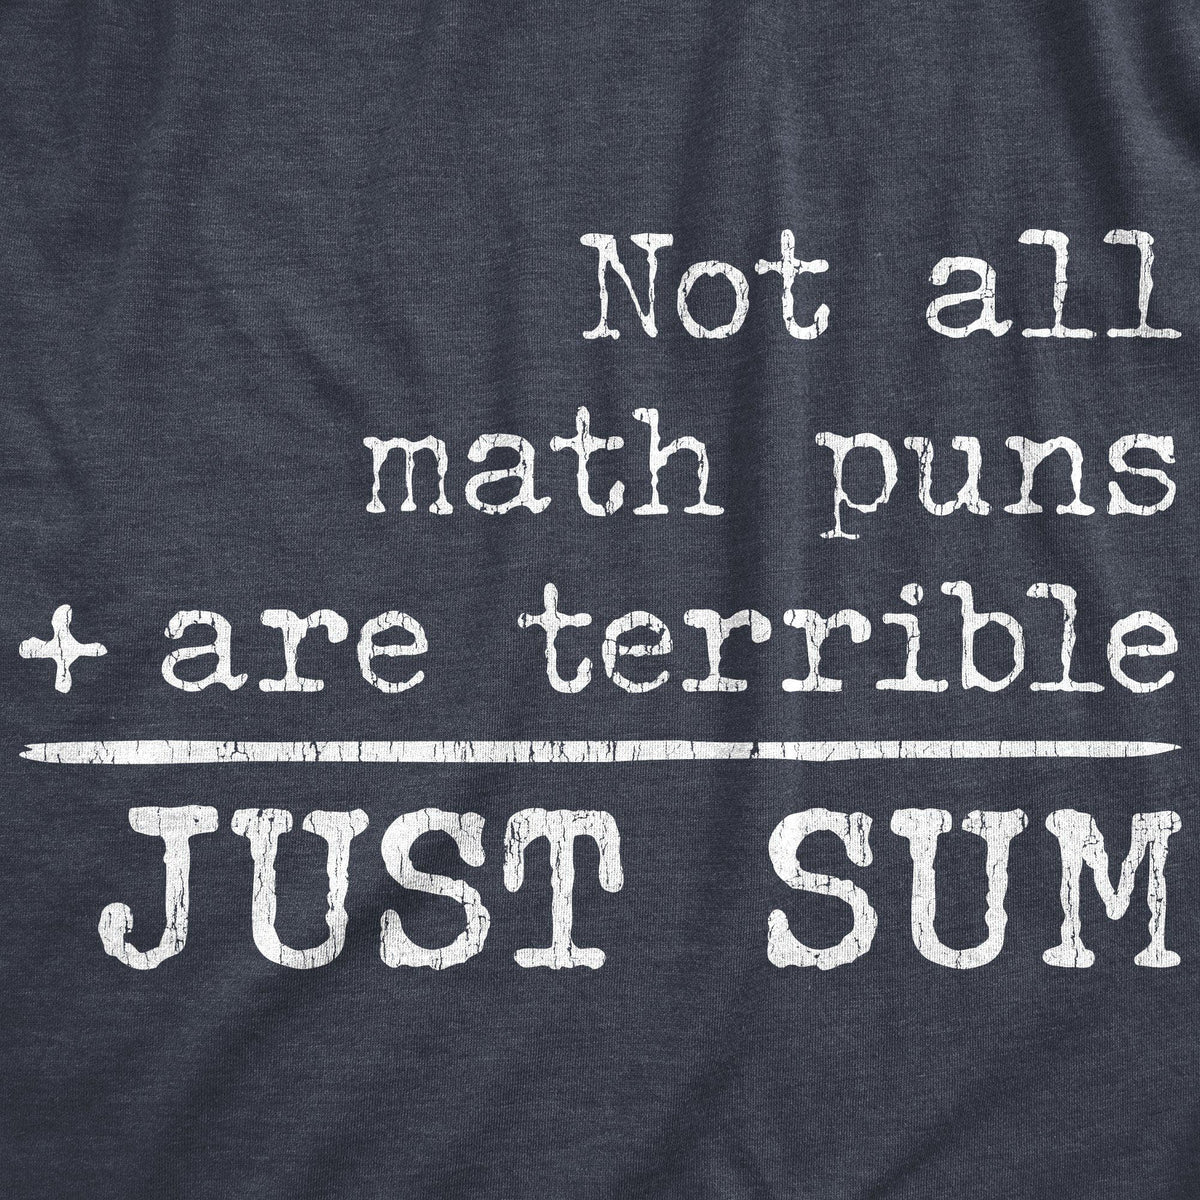 Not All Math Puns Are Terrible Just Sum Women&#39;s Tshirt - Crazy Dog T-Shirts